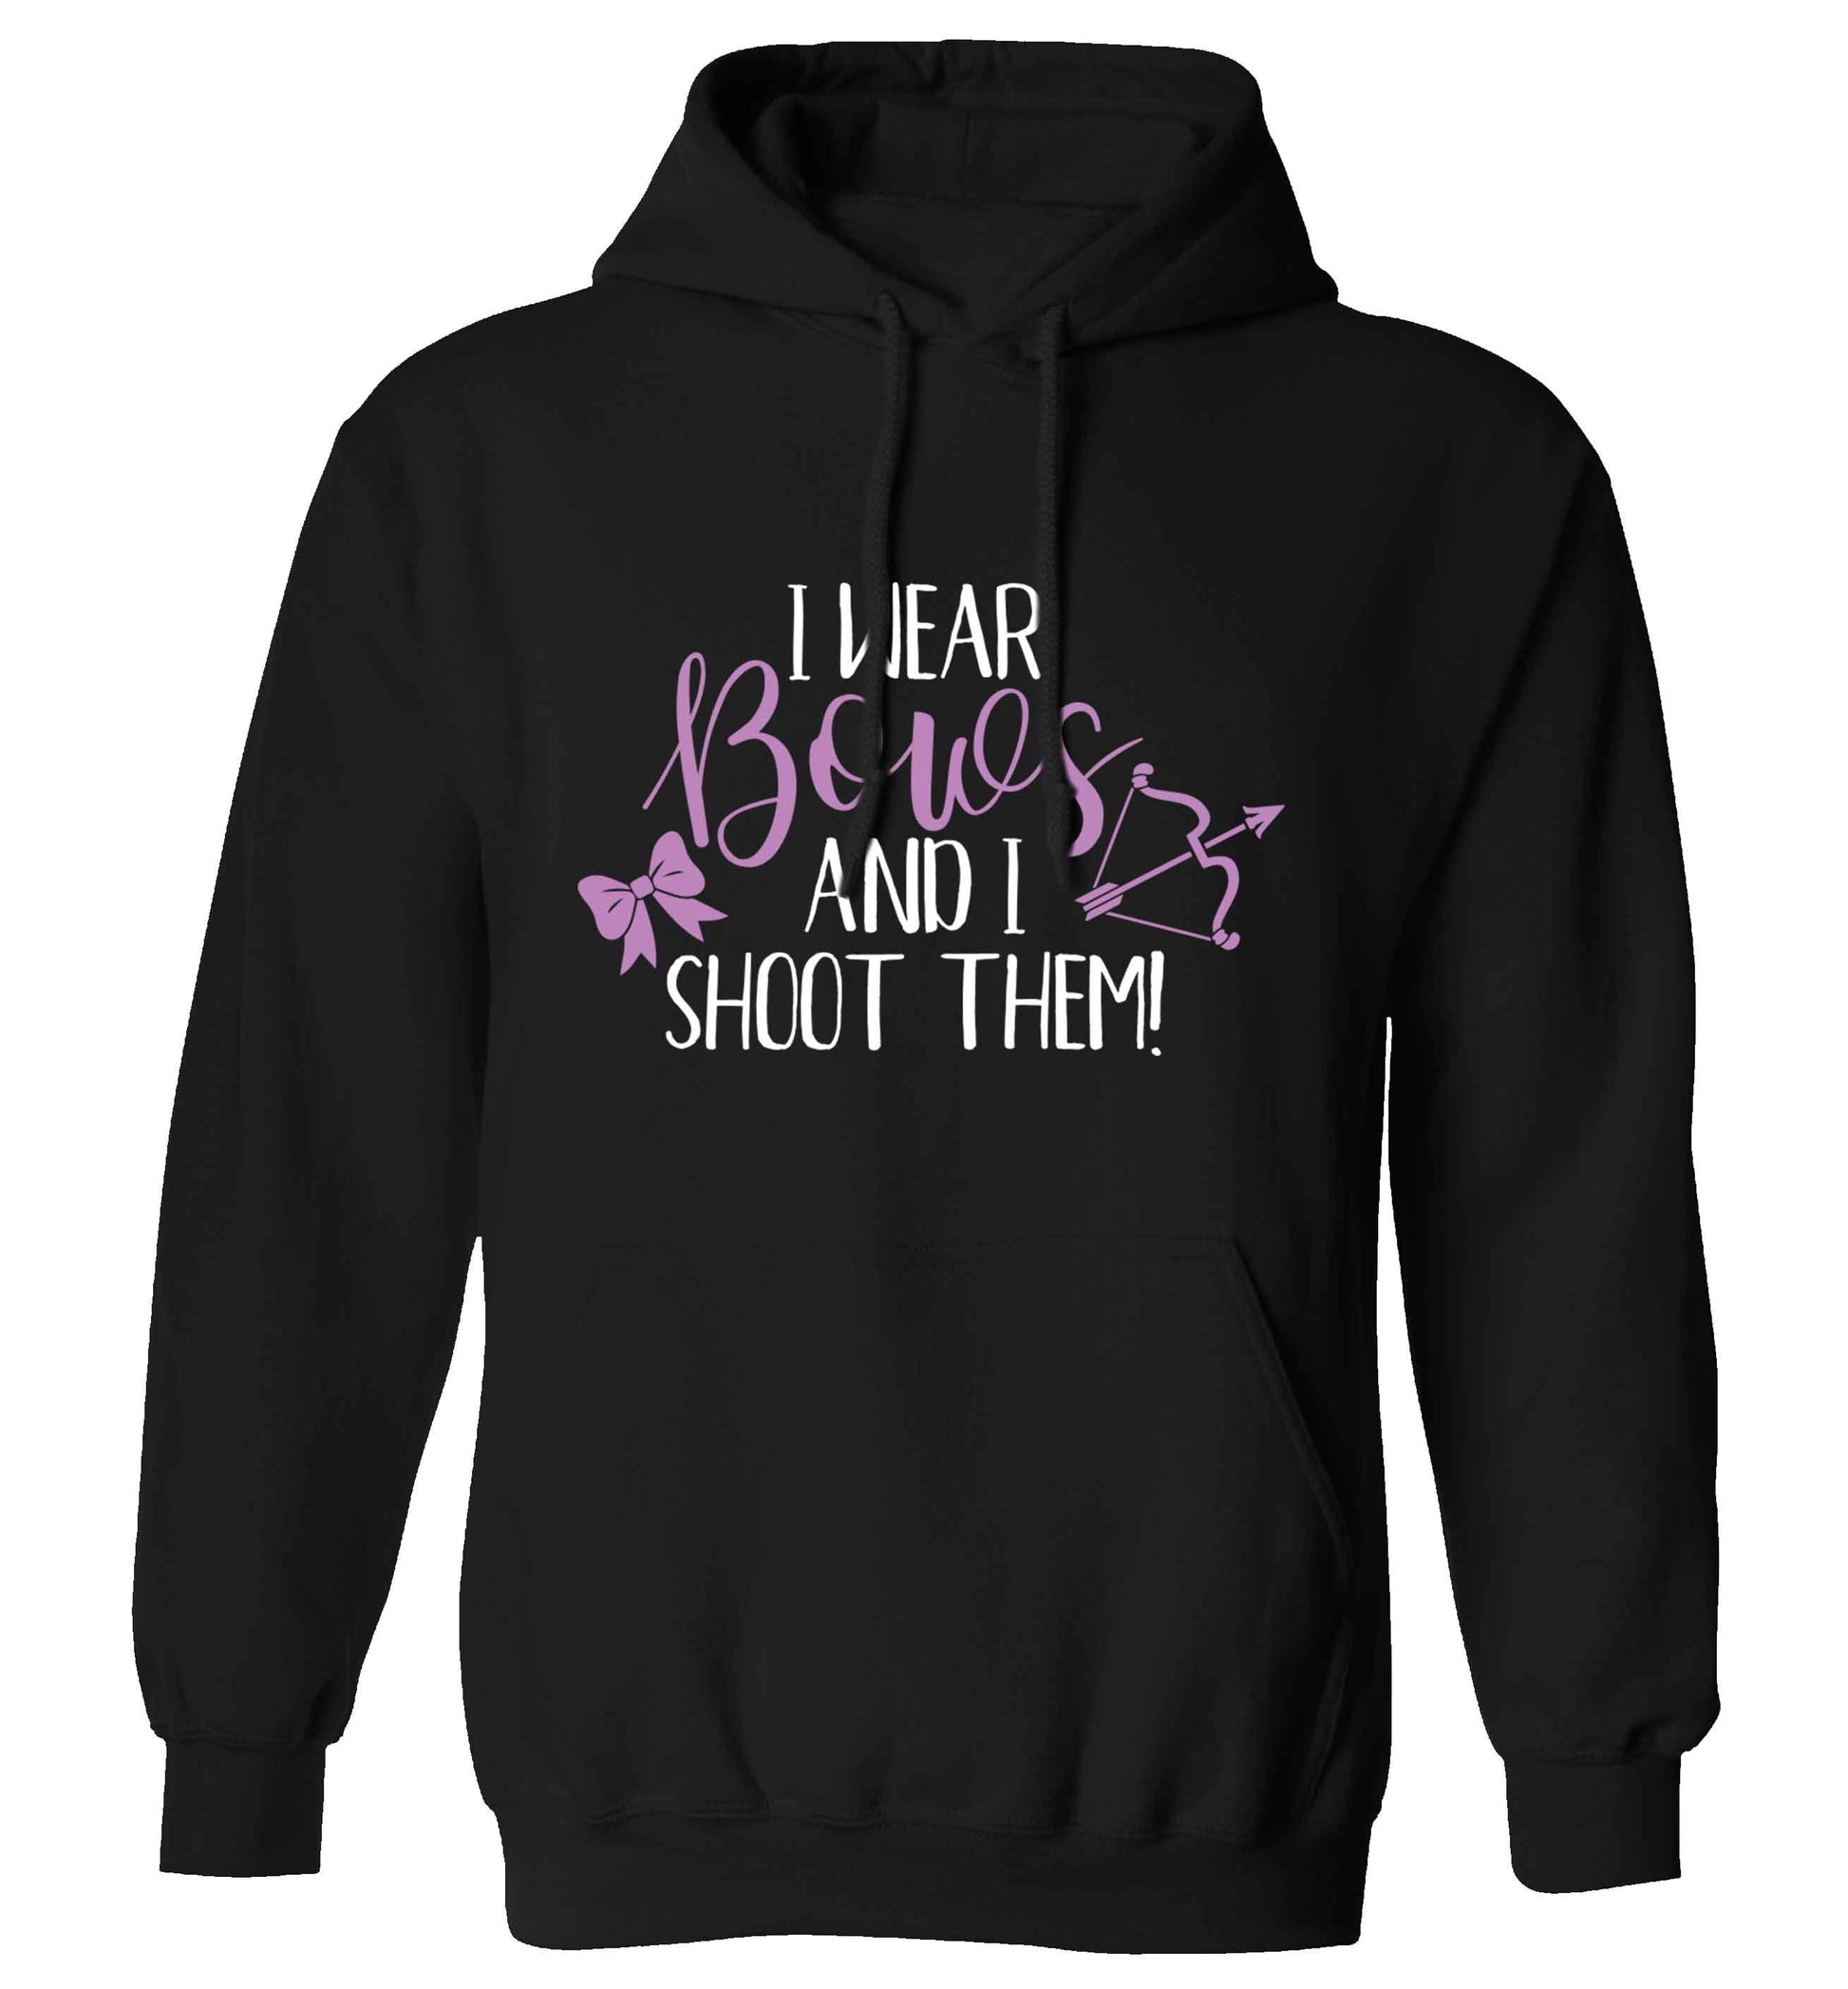 I wear bows and I shoot them adults unisex black hoodie 2XL